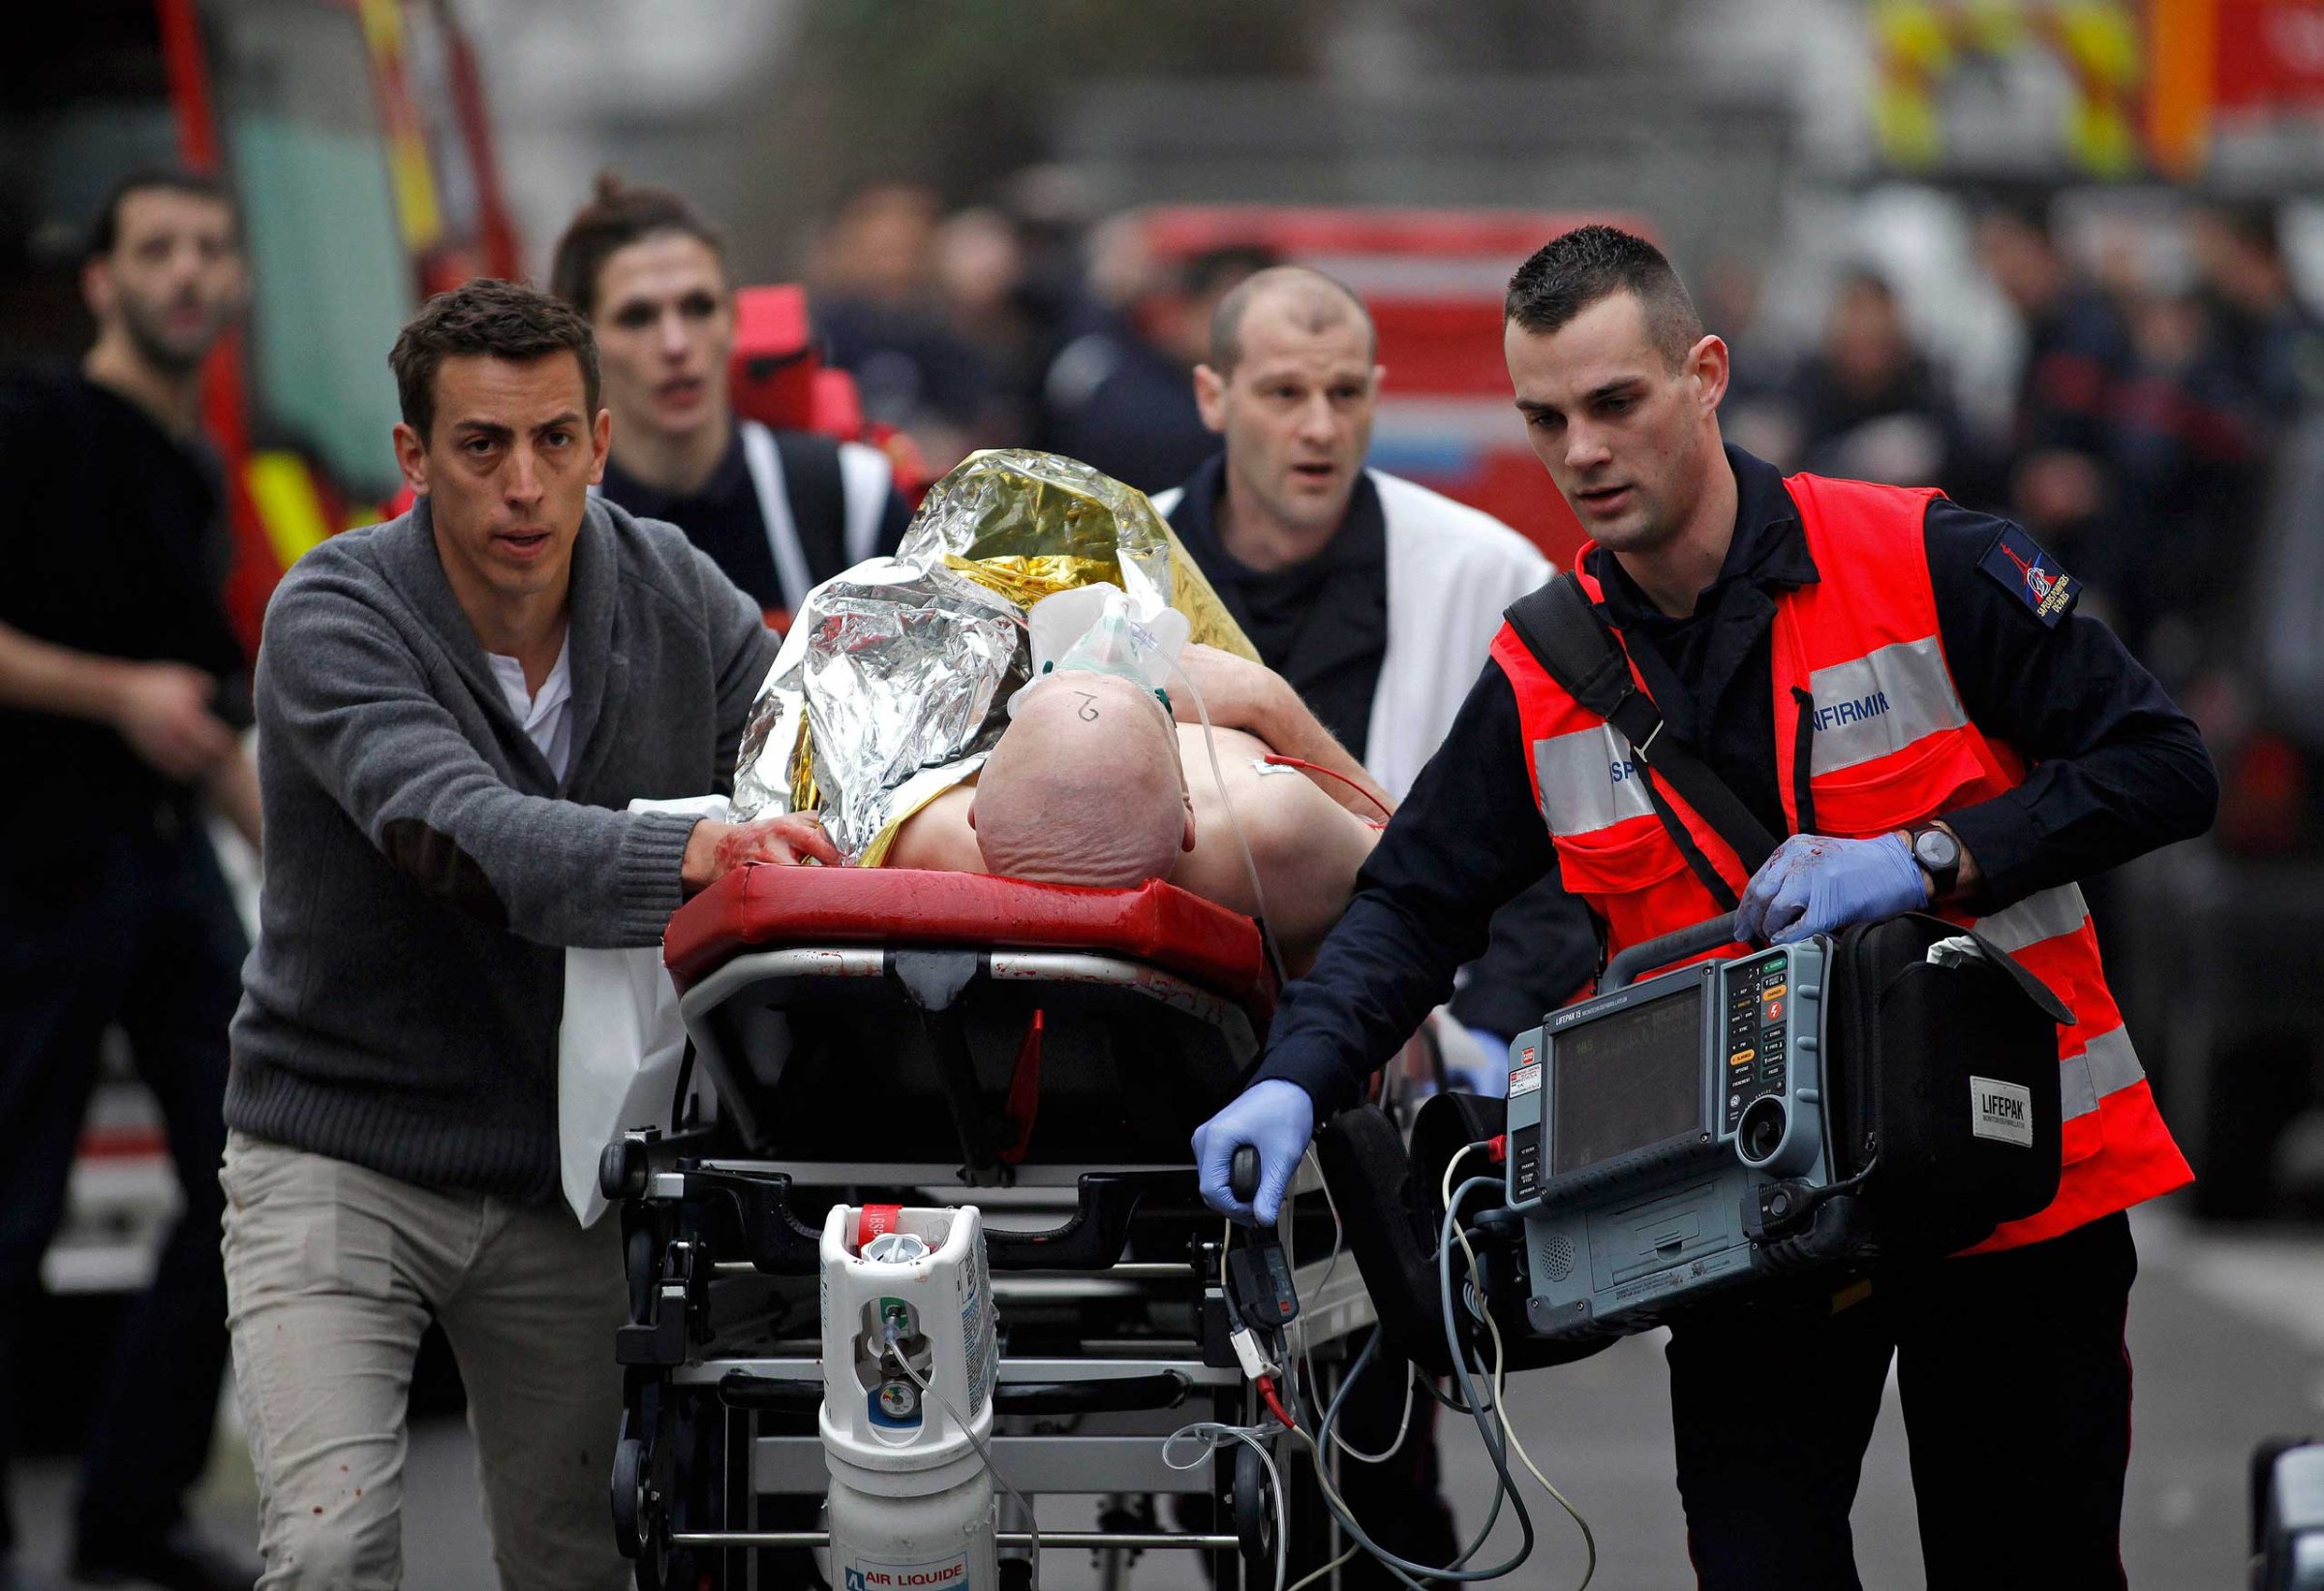 An injured person is evacuated outside the French satirical newspaper Charlie Hebdo's office, in Paris, Jan. 7, 2015. Police official says 11 dead in shooting at the French satirical newspaper.